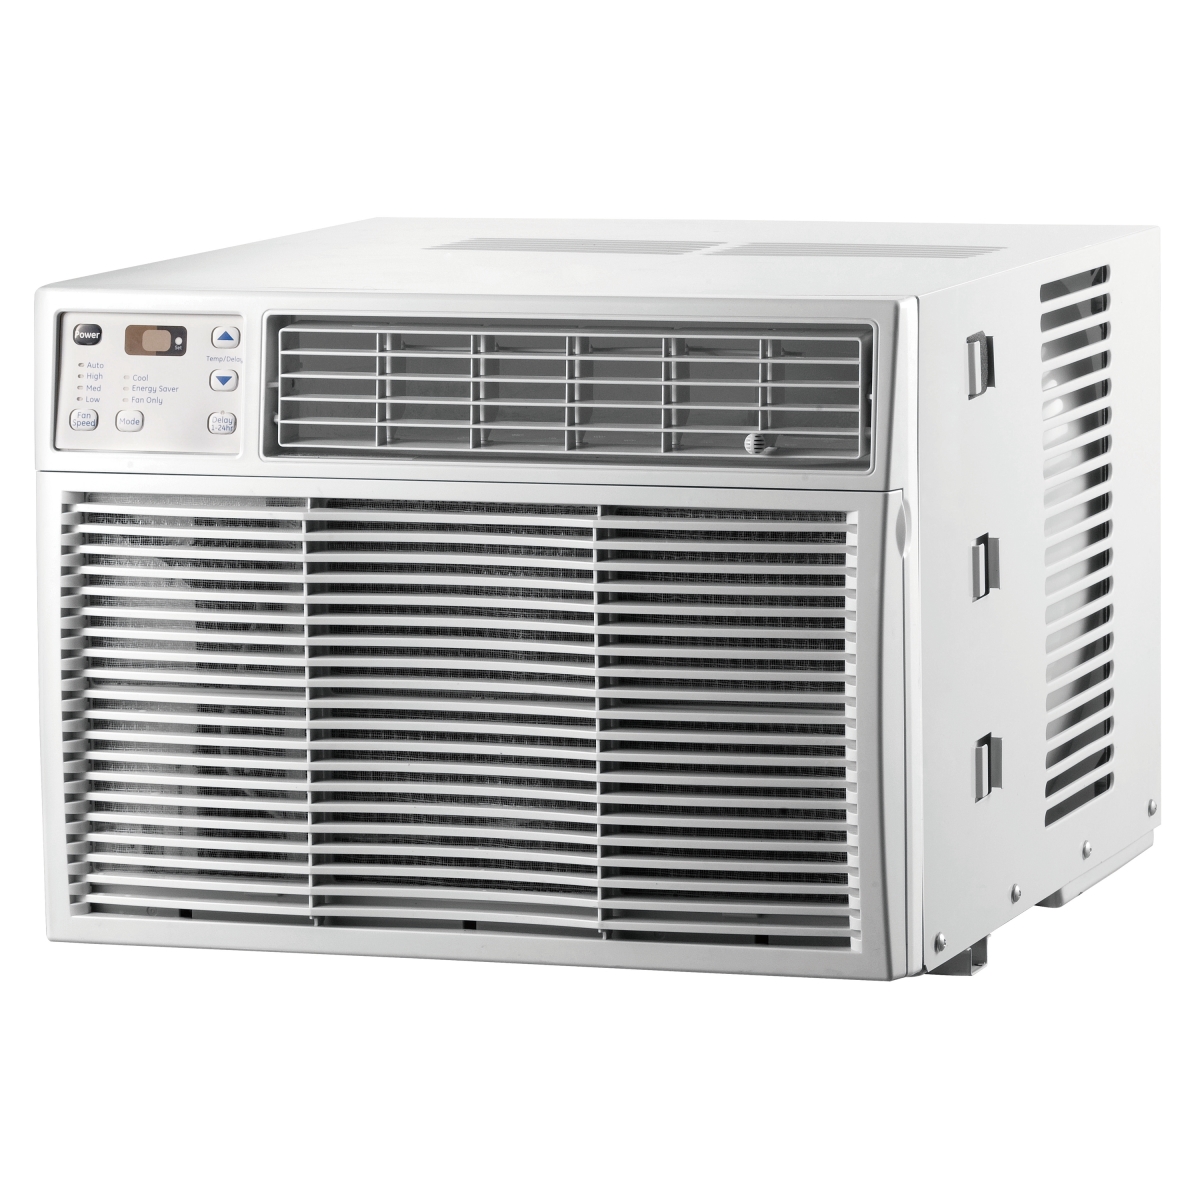 Tosot TWAC12-C116RE4 Tosot 12000 BTU Window Air Conditioner with Remote Control